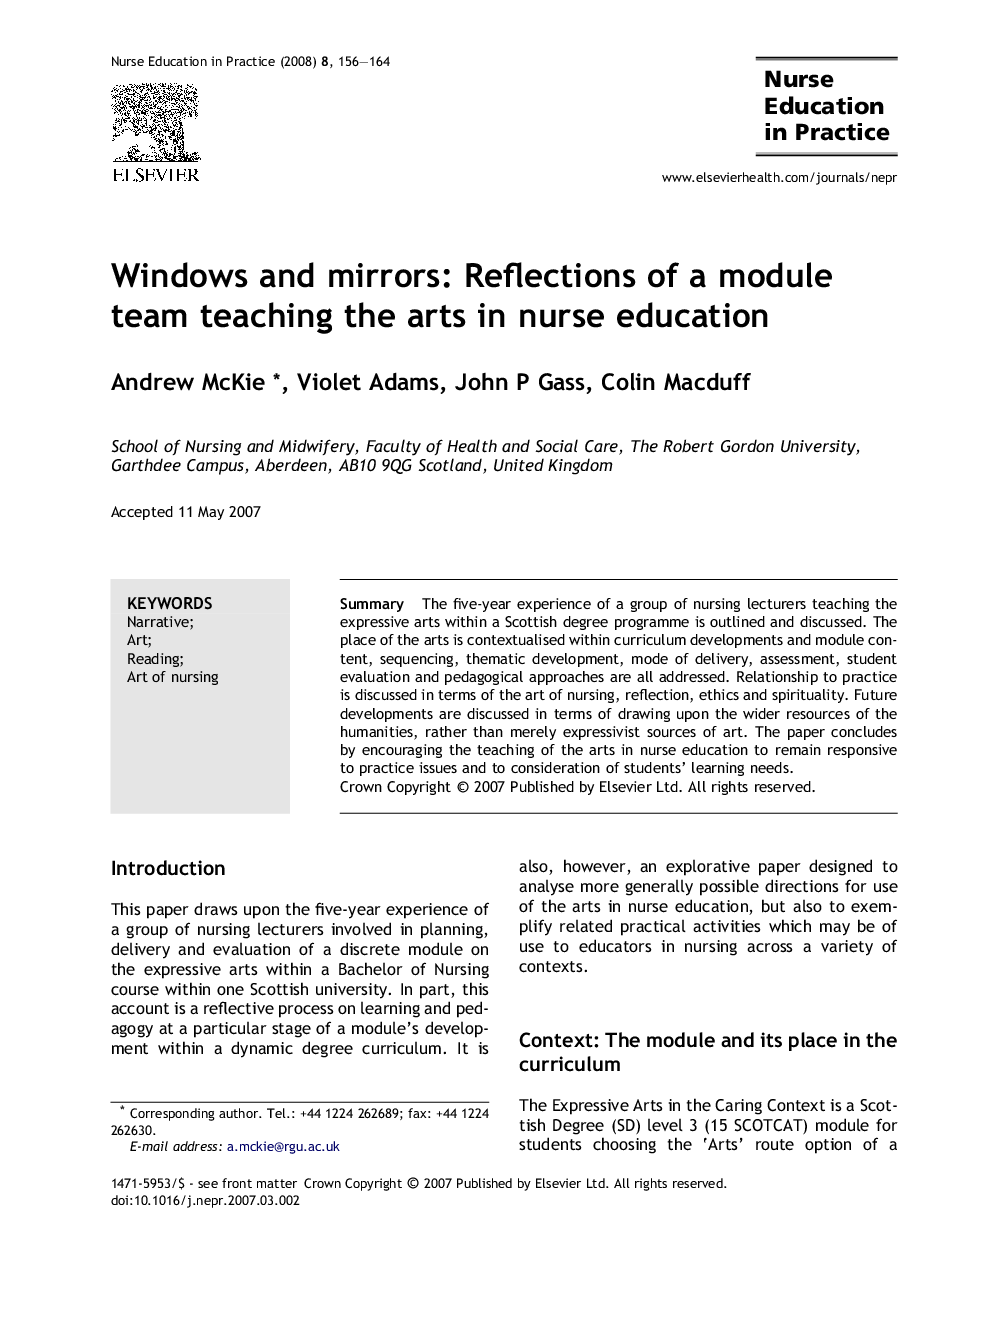 Windows and mirrors: Reflections of a module team teaching the arts in nurse education